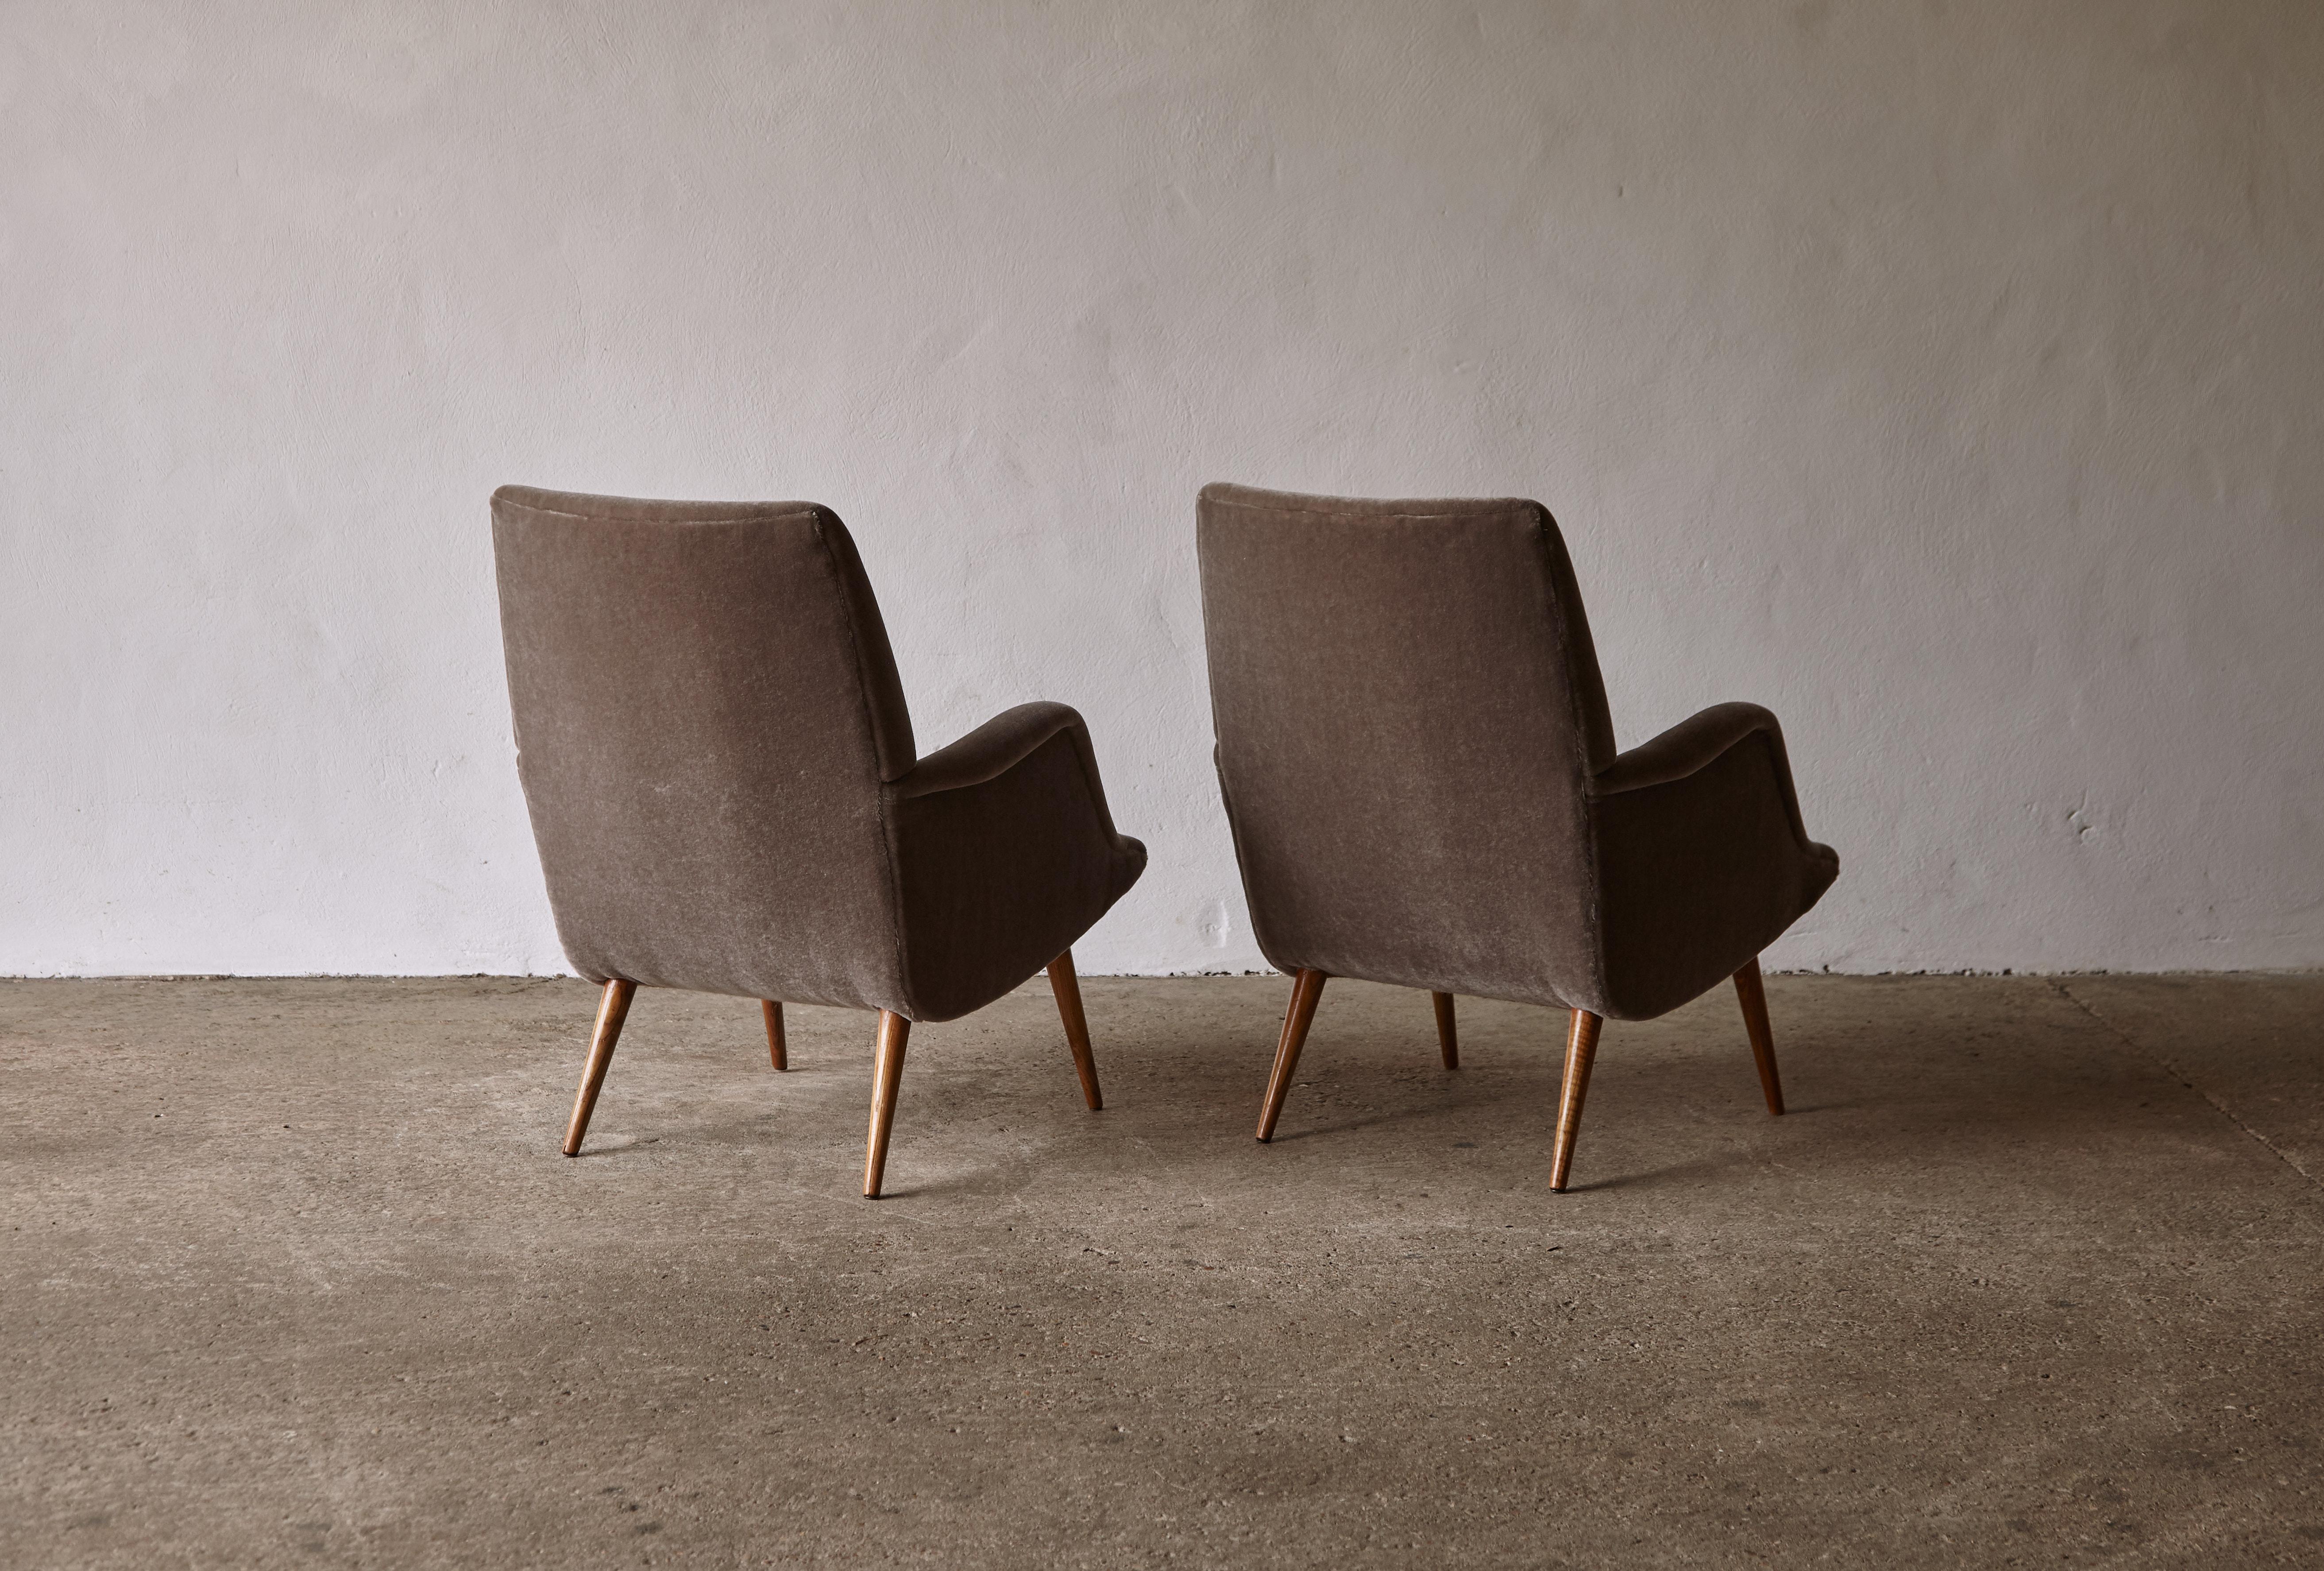 Carlo de Carli Model 806 Chairs, Produced by Cassina, Italy, 1950s For Sale 1